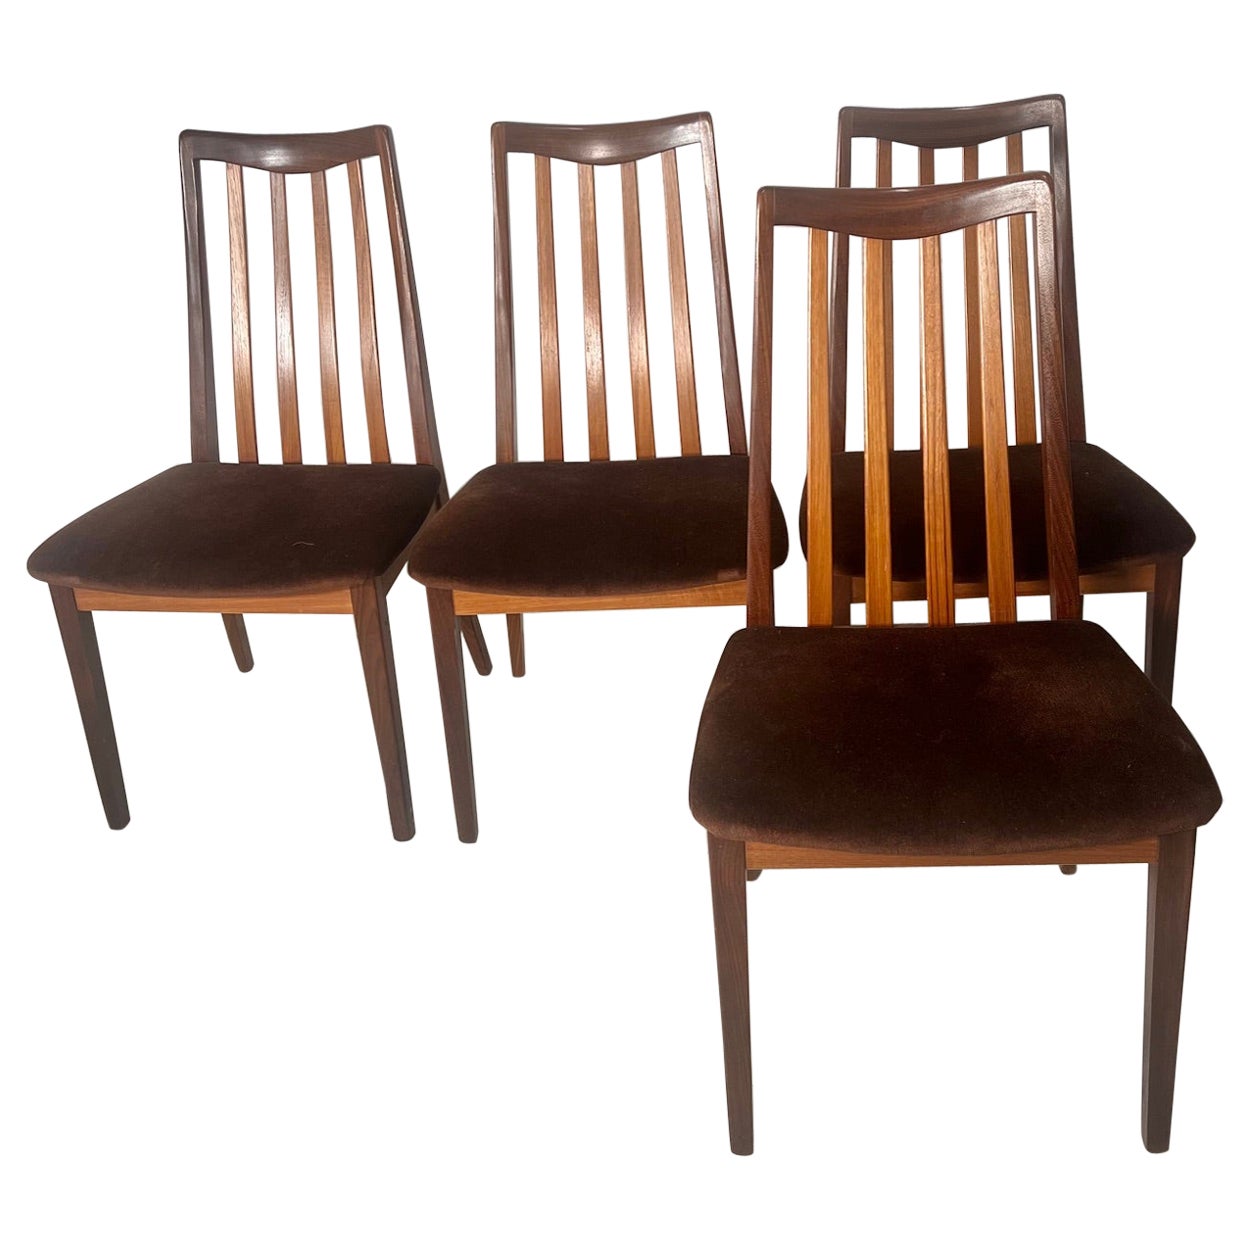 Set Of 4 Mid Century Modern Teak Dining Chairs By G Plan For Sale